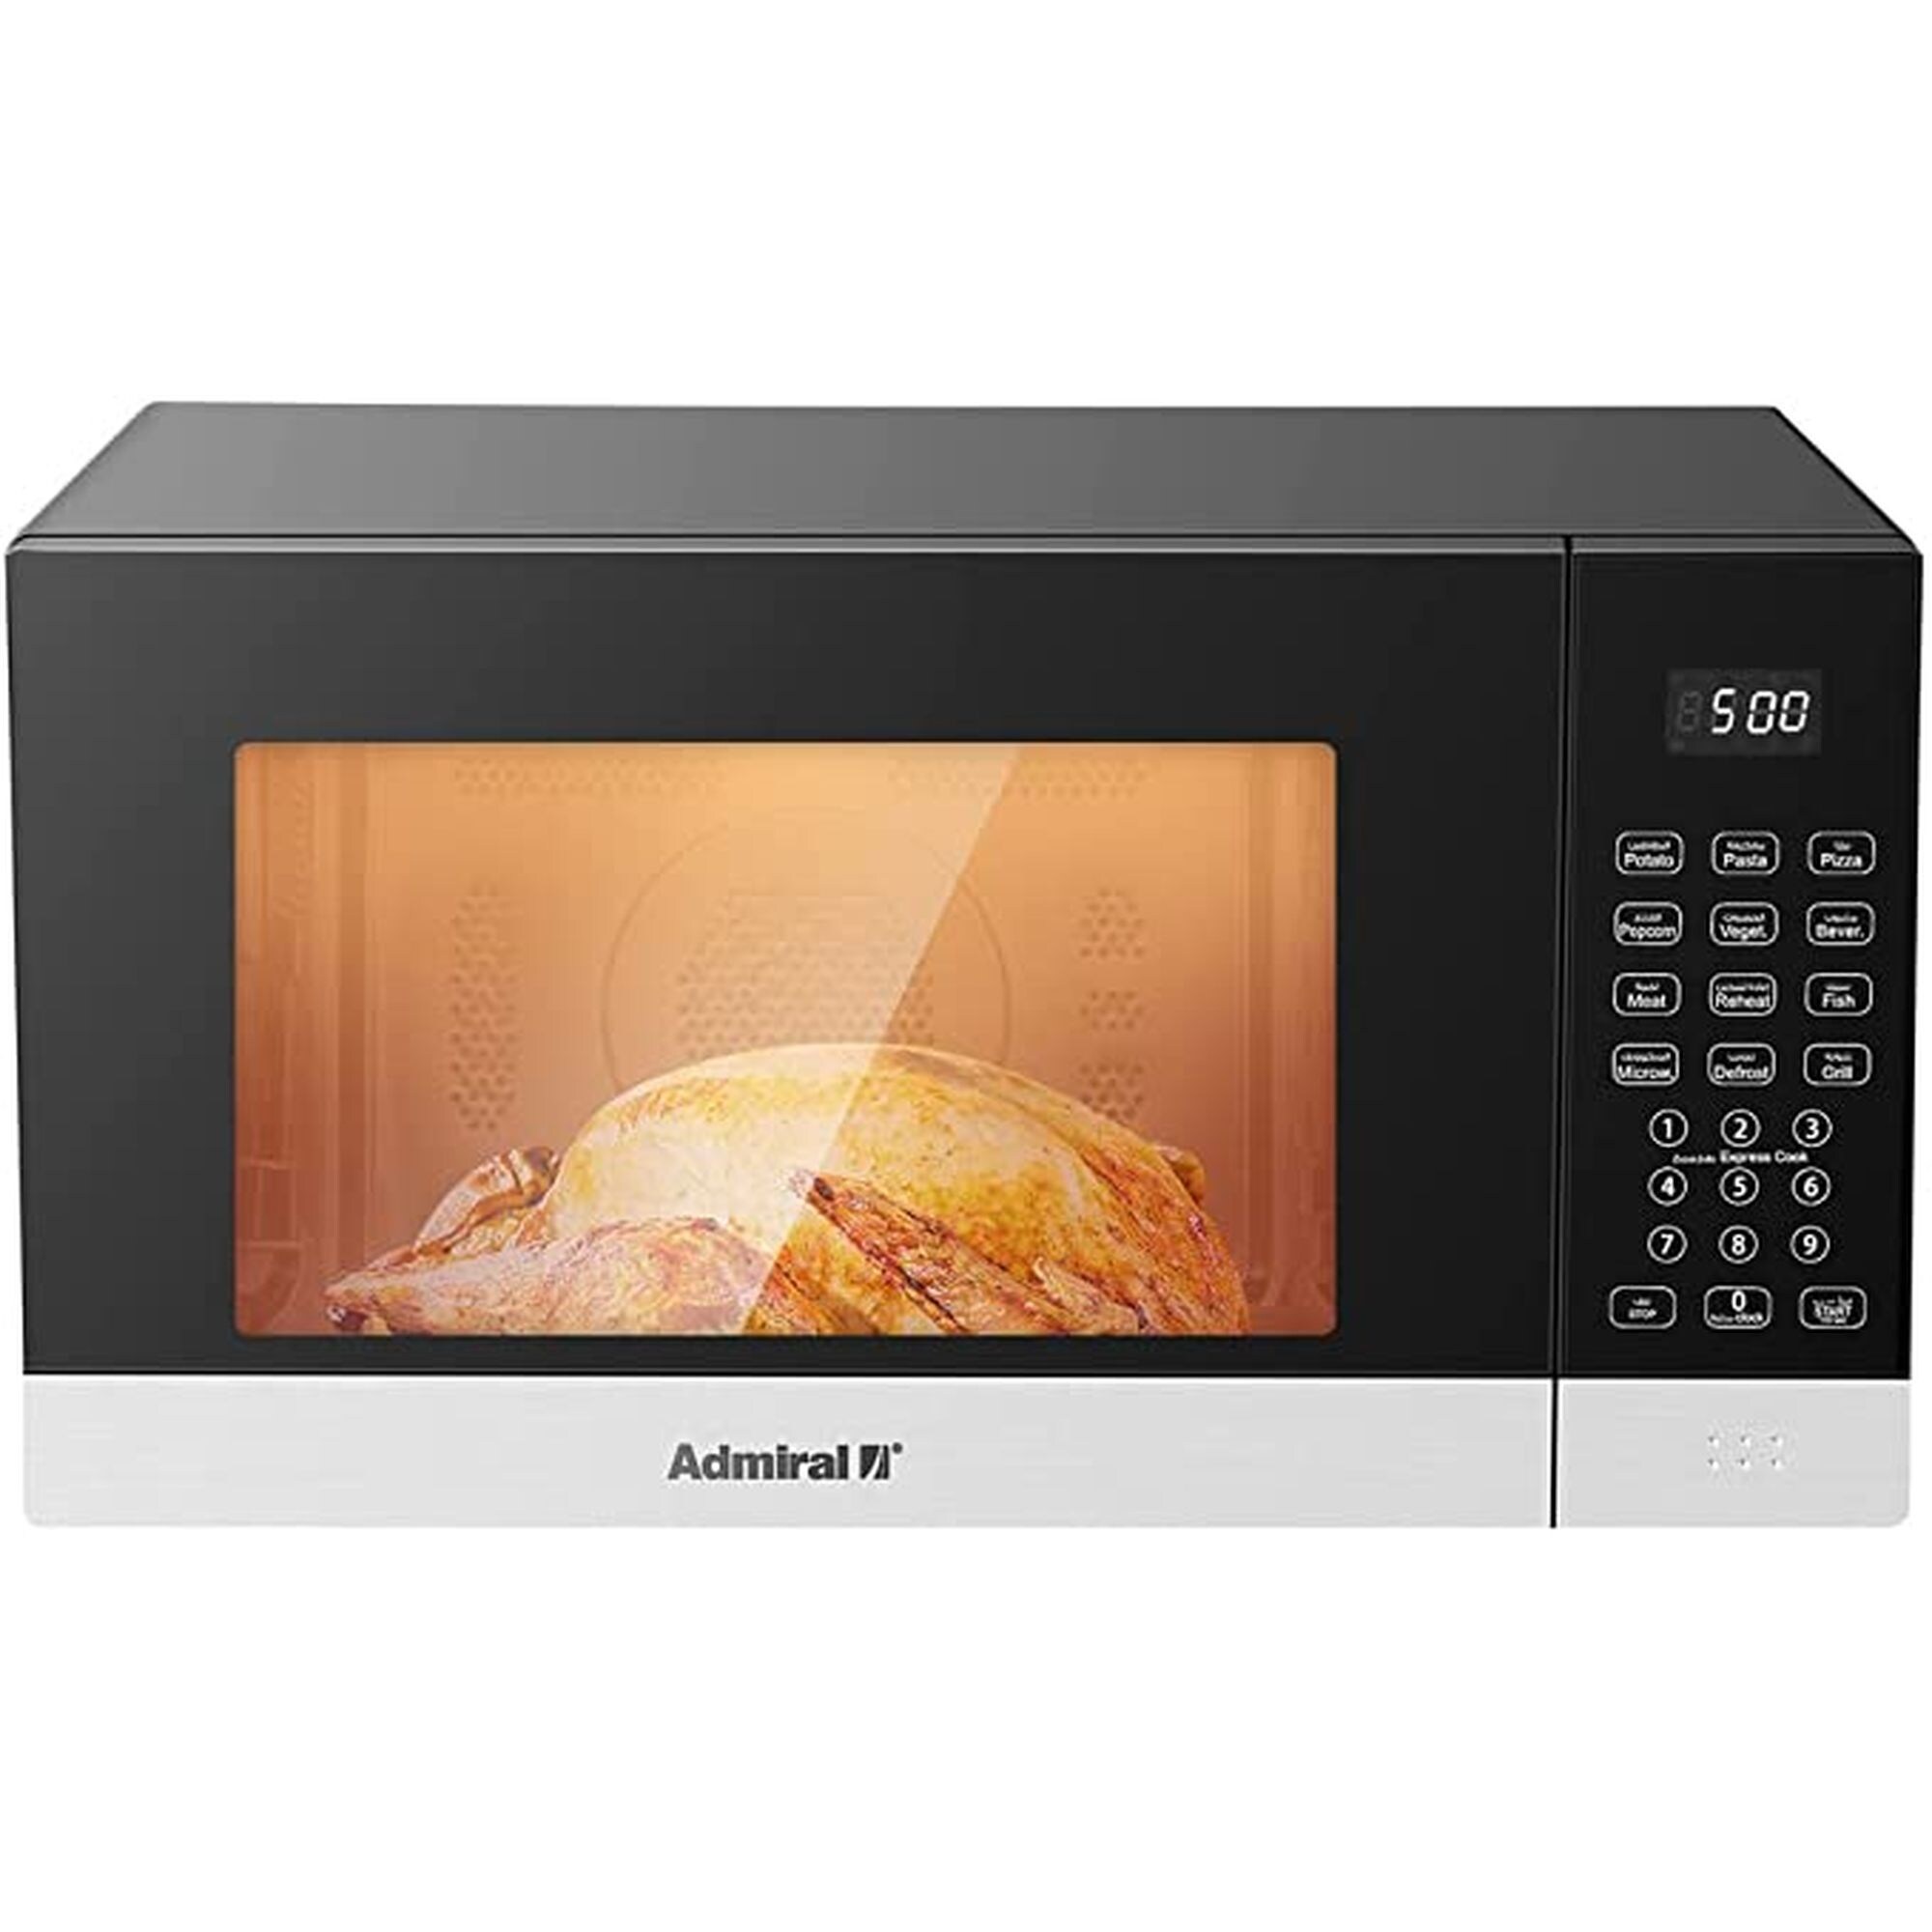 Admiral Microwave Oven With Grill, 800W, Black